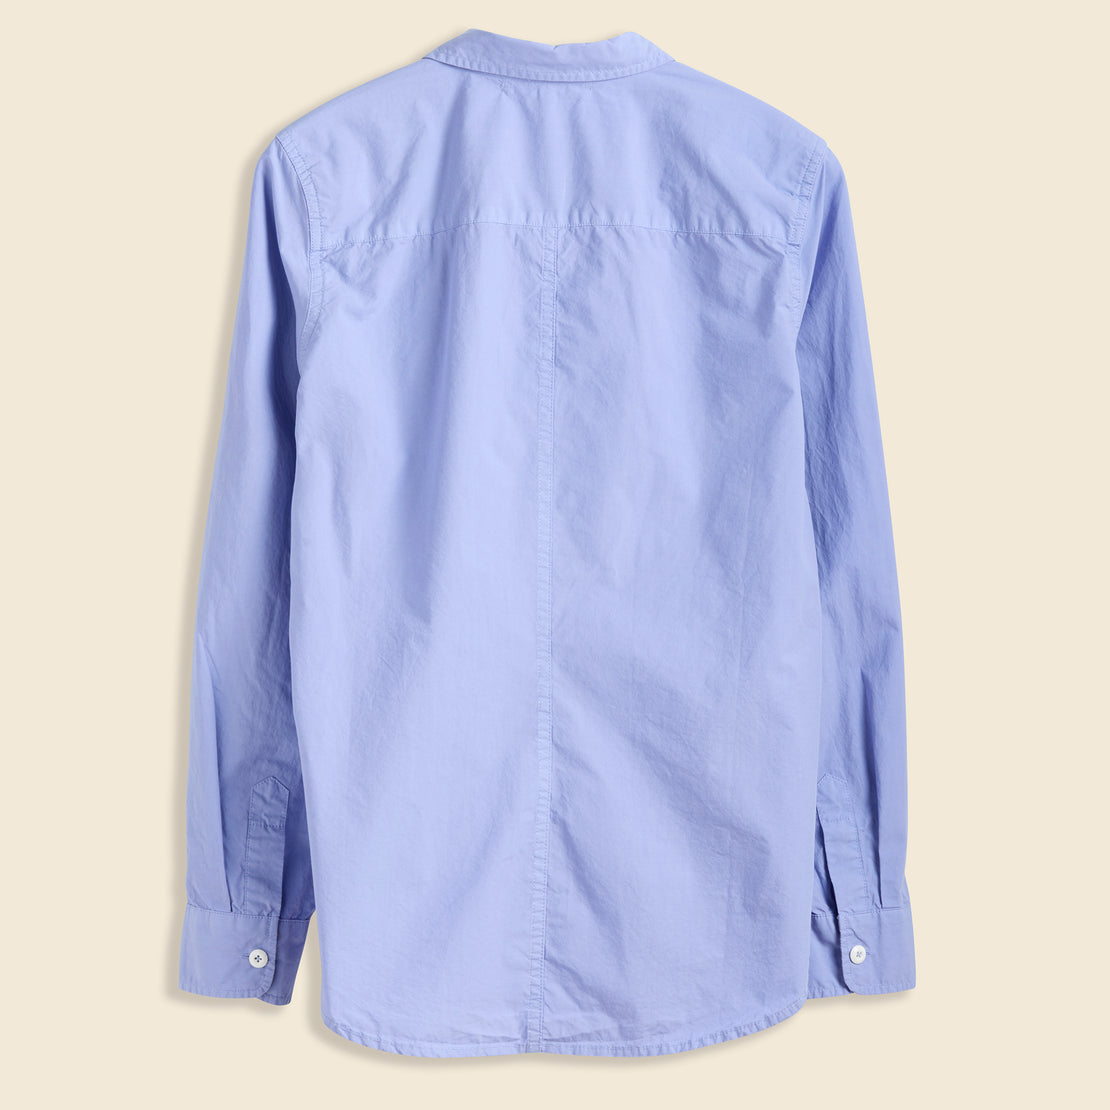 Bobby Shirt - Paper Cotton - Alex Mill - STAG Provisions - W - Tops - L/S Woven